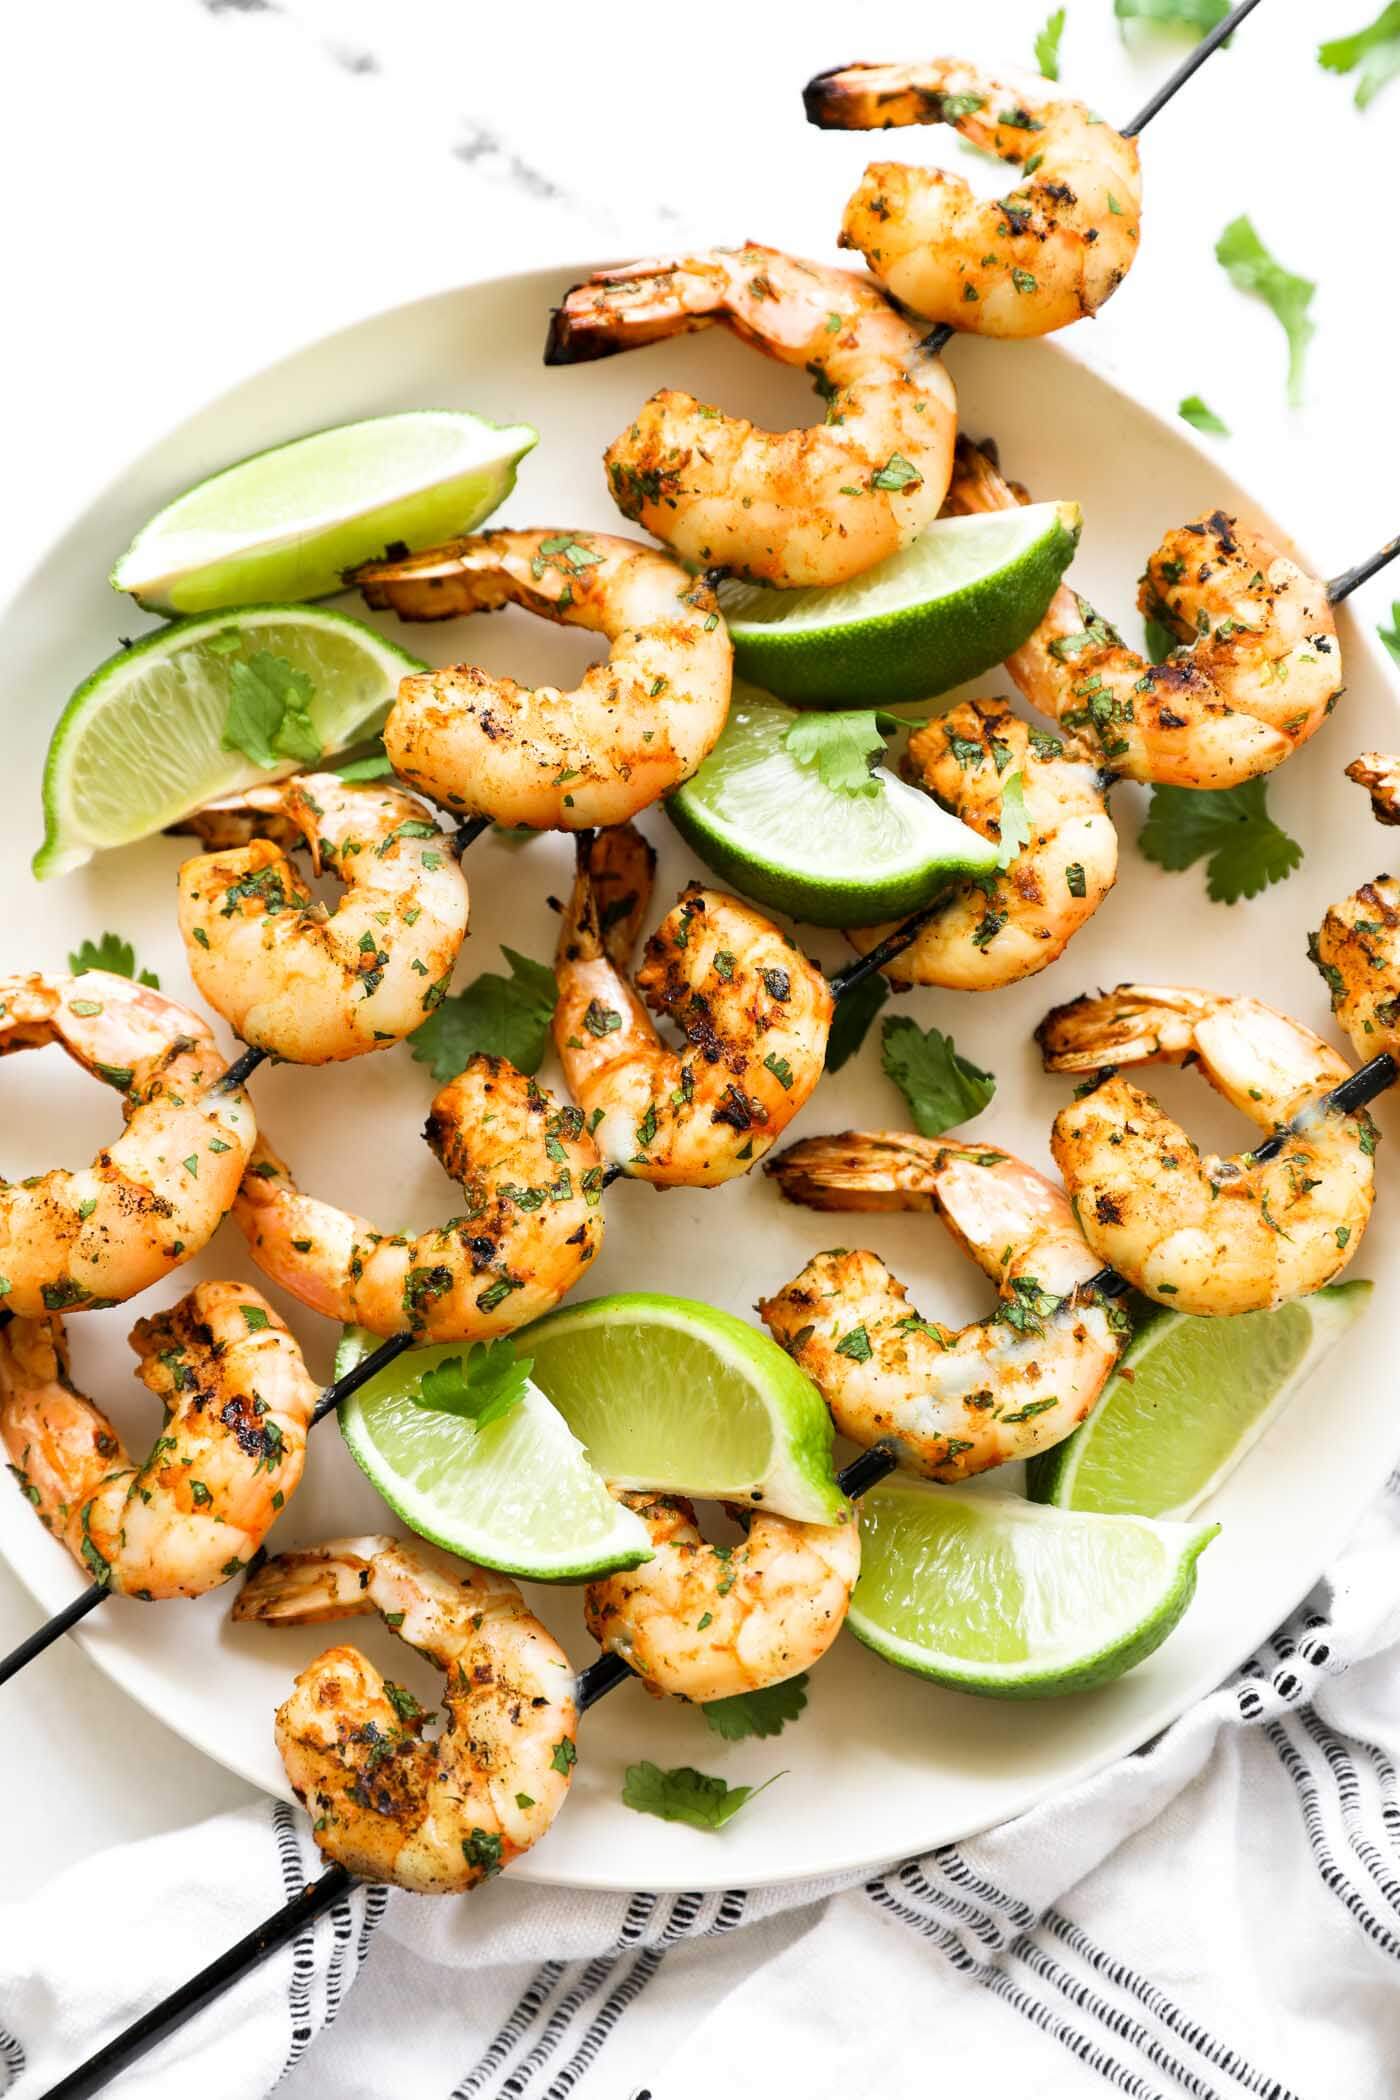 Grilled shrimp kabobs laid out on a plate. 3 skewers with lime wedges and fresh cilantro garnish.